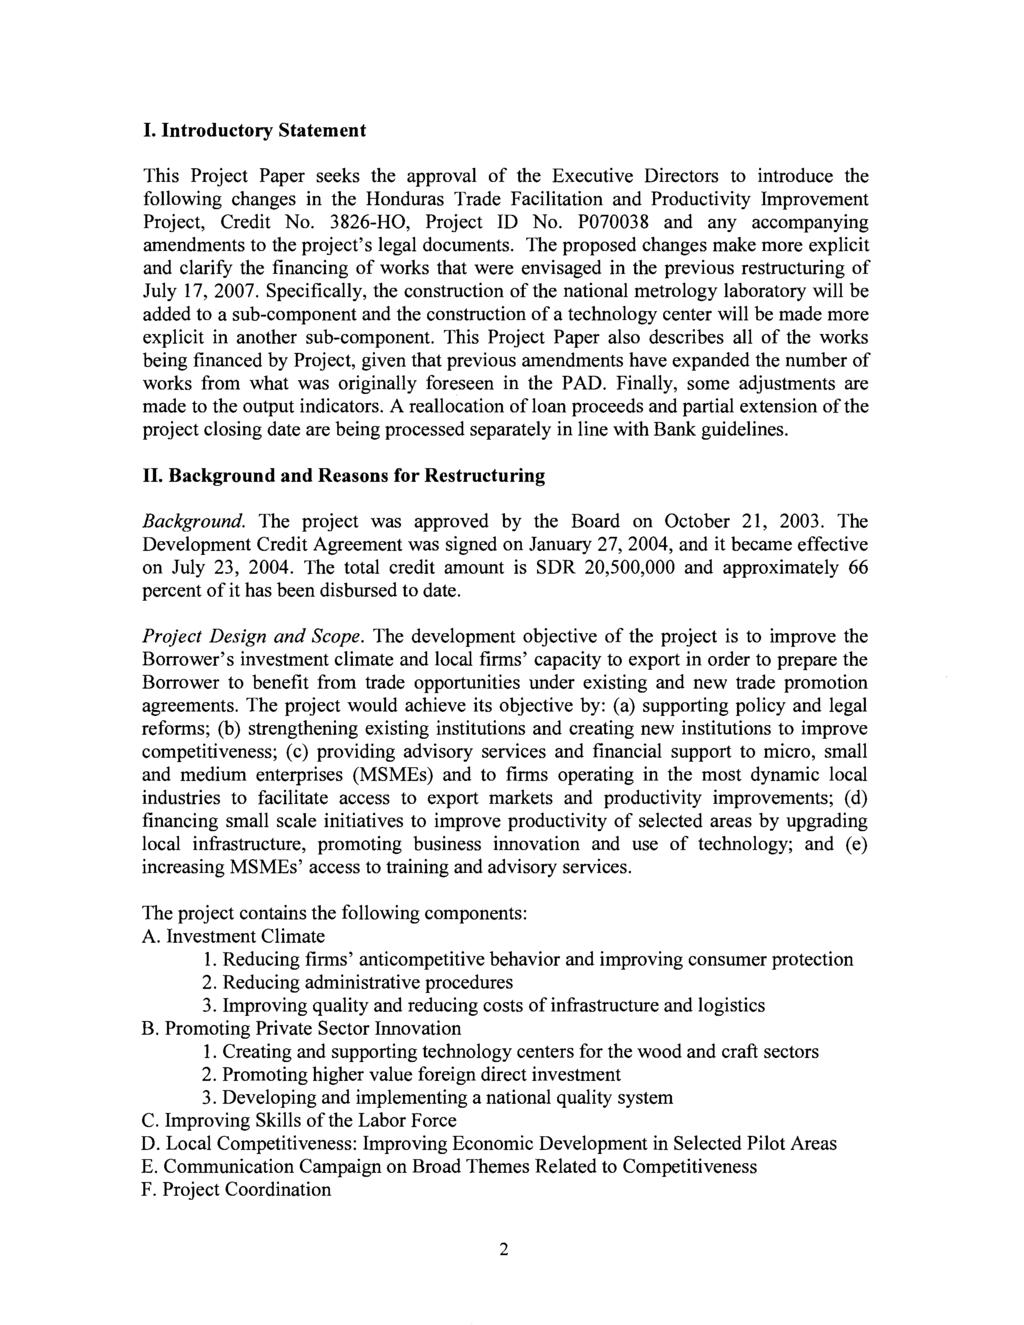 I. Introductory Statement This Project Paper seeks the approval of the Executive Directors to introduce the following changes in the Honduras Trade Facilitation and Productivity Improvement Project,